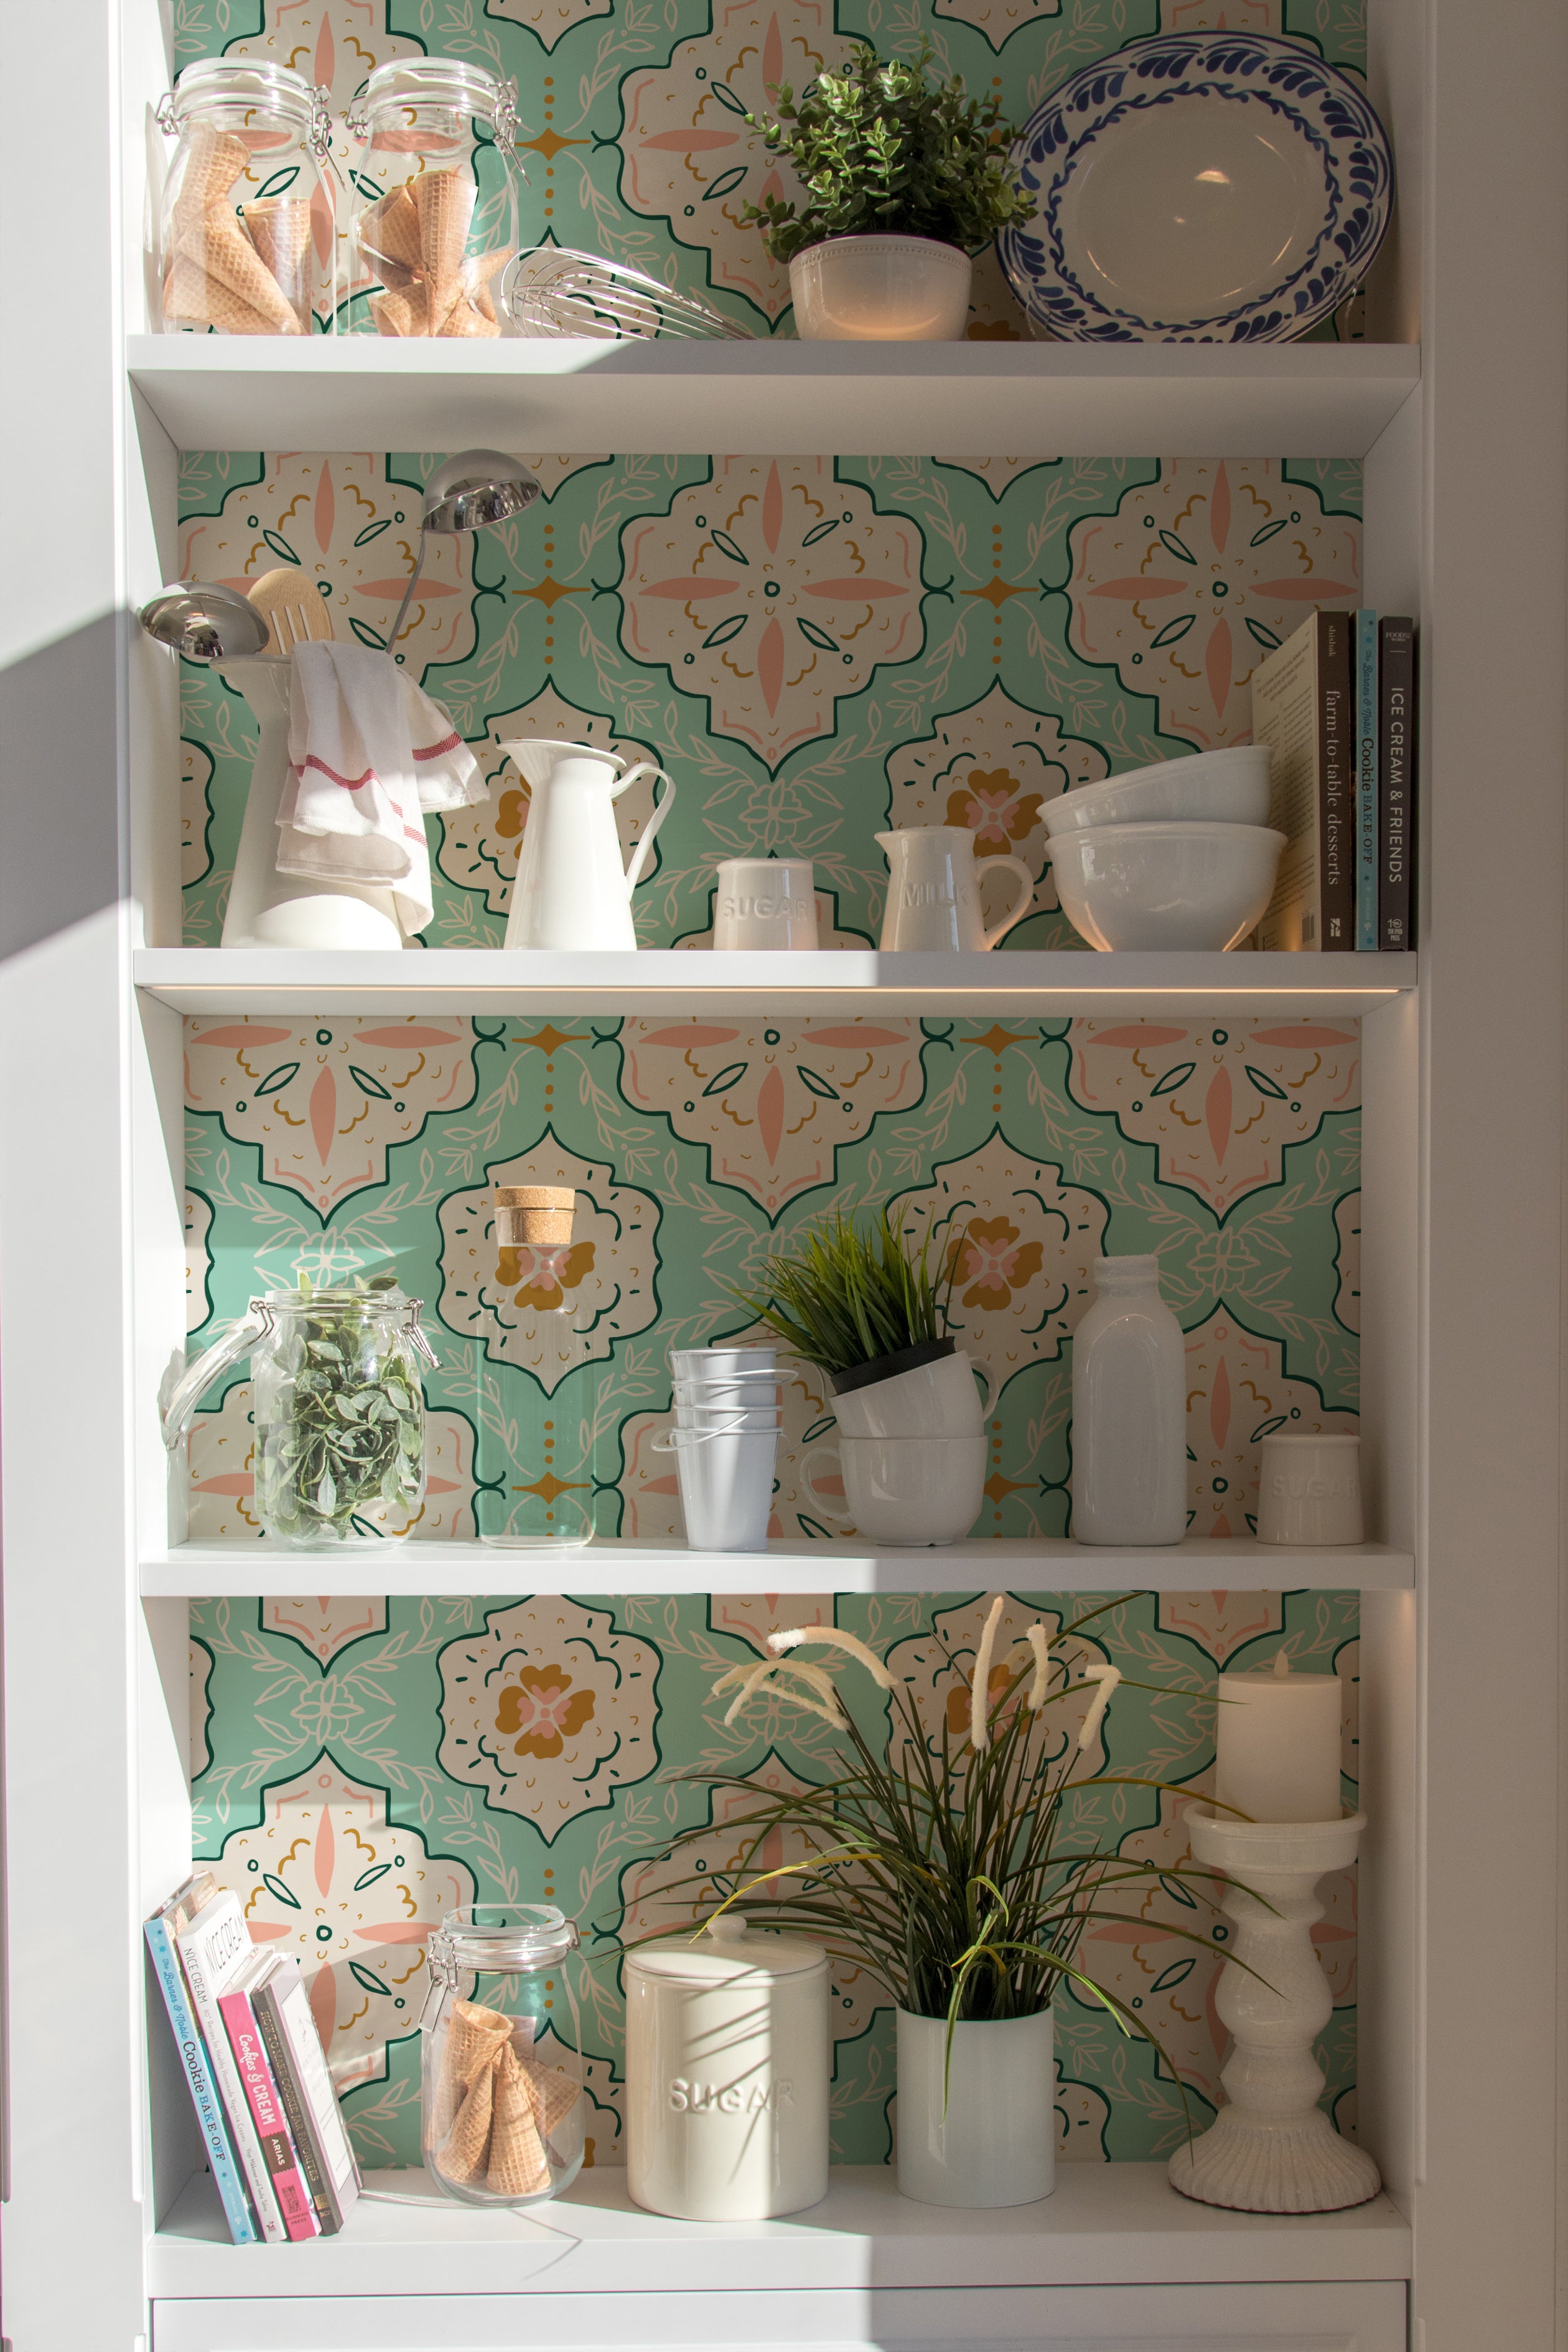 "Interior shelving unit decorated with Fatima Tile Wallpaper featuring intricate Moroccan-style patterns in turquoise, peach, and white, displaying kitchen items like pots and cookbooks.